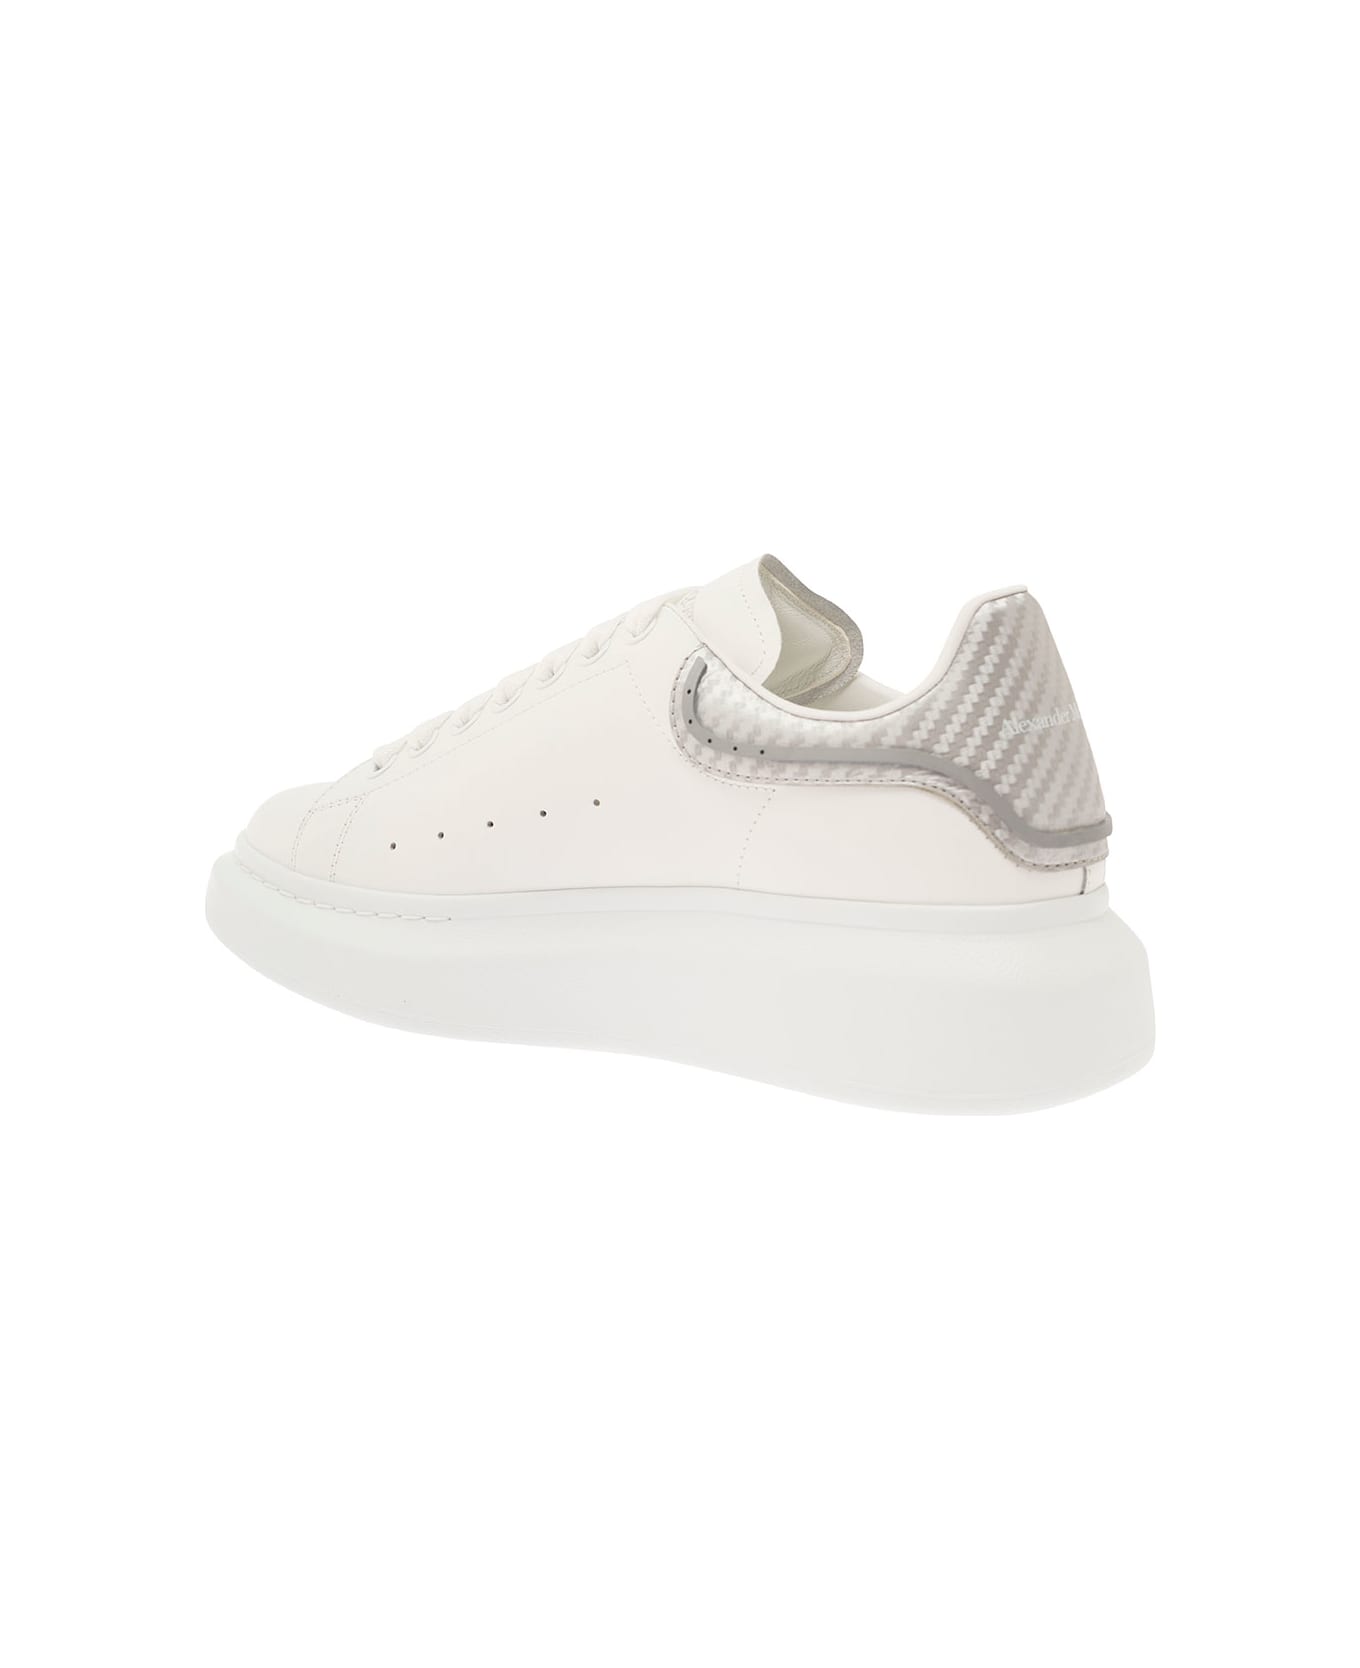 Alexander McQueen White Sneakers With Metallic Heel Tab In Leather Man - White